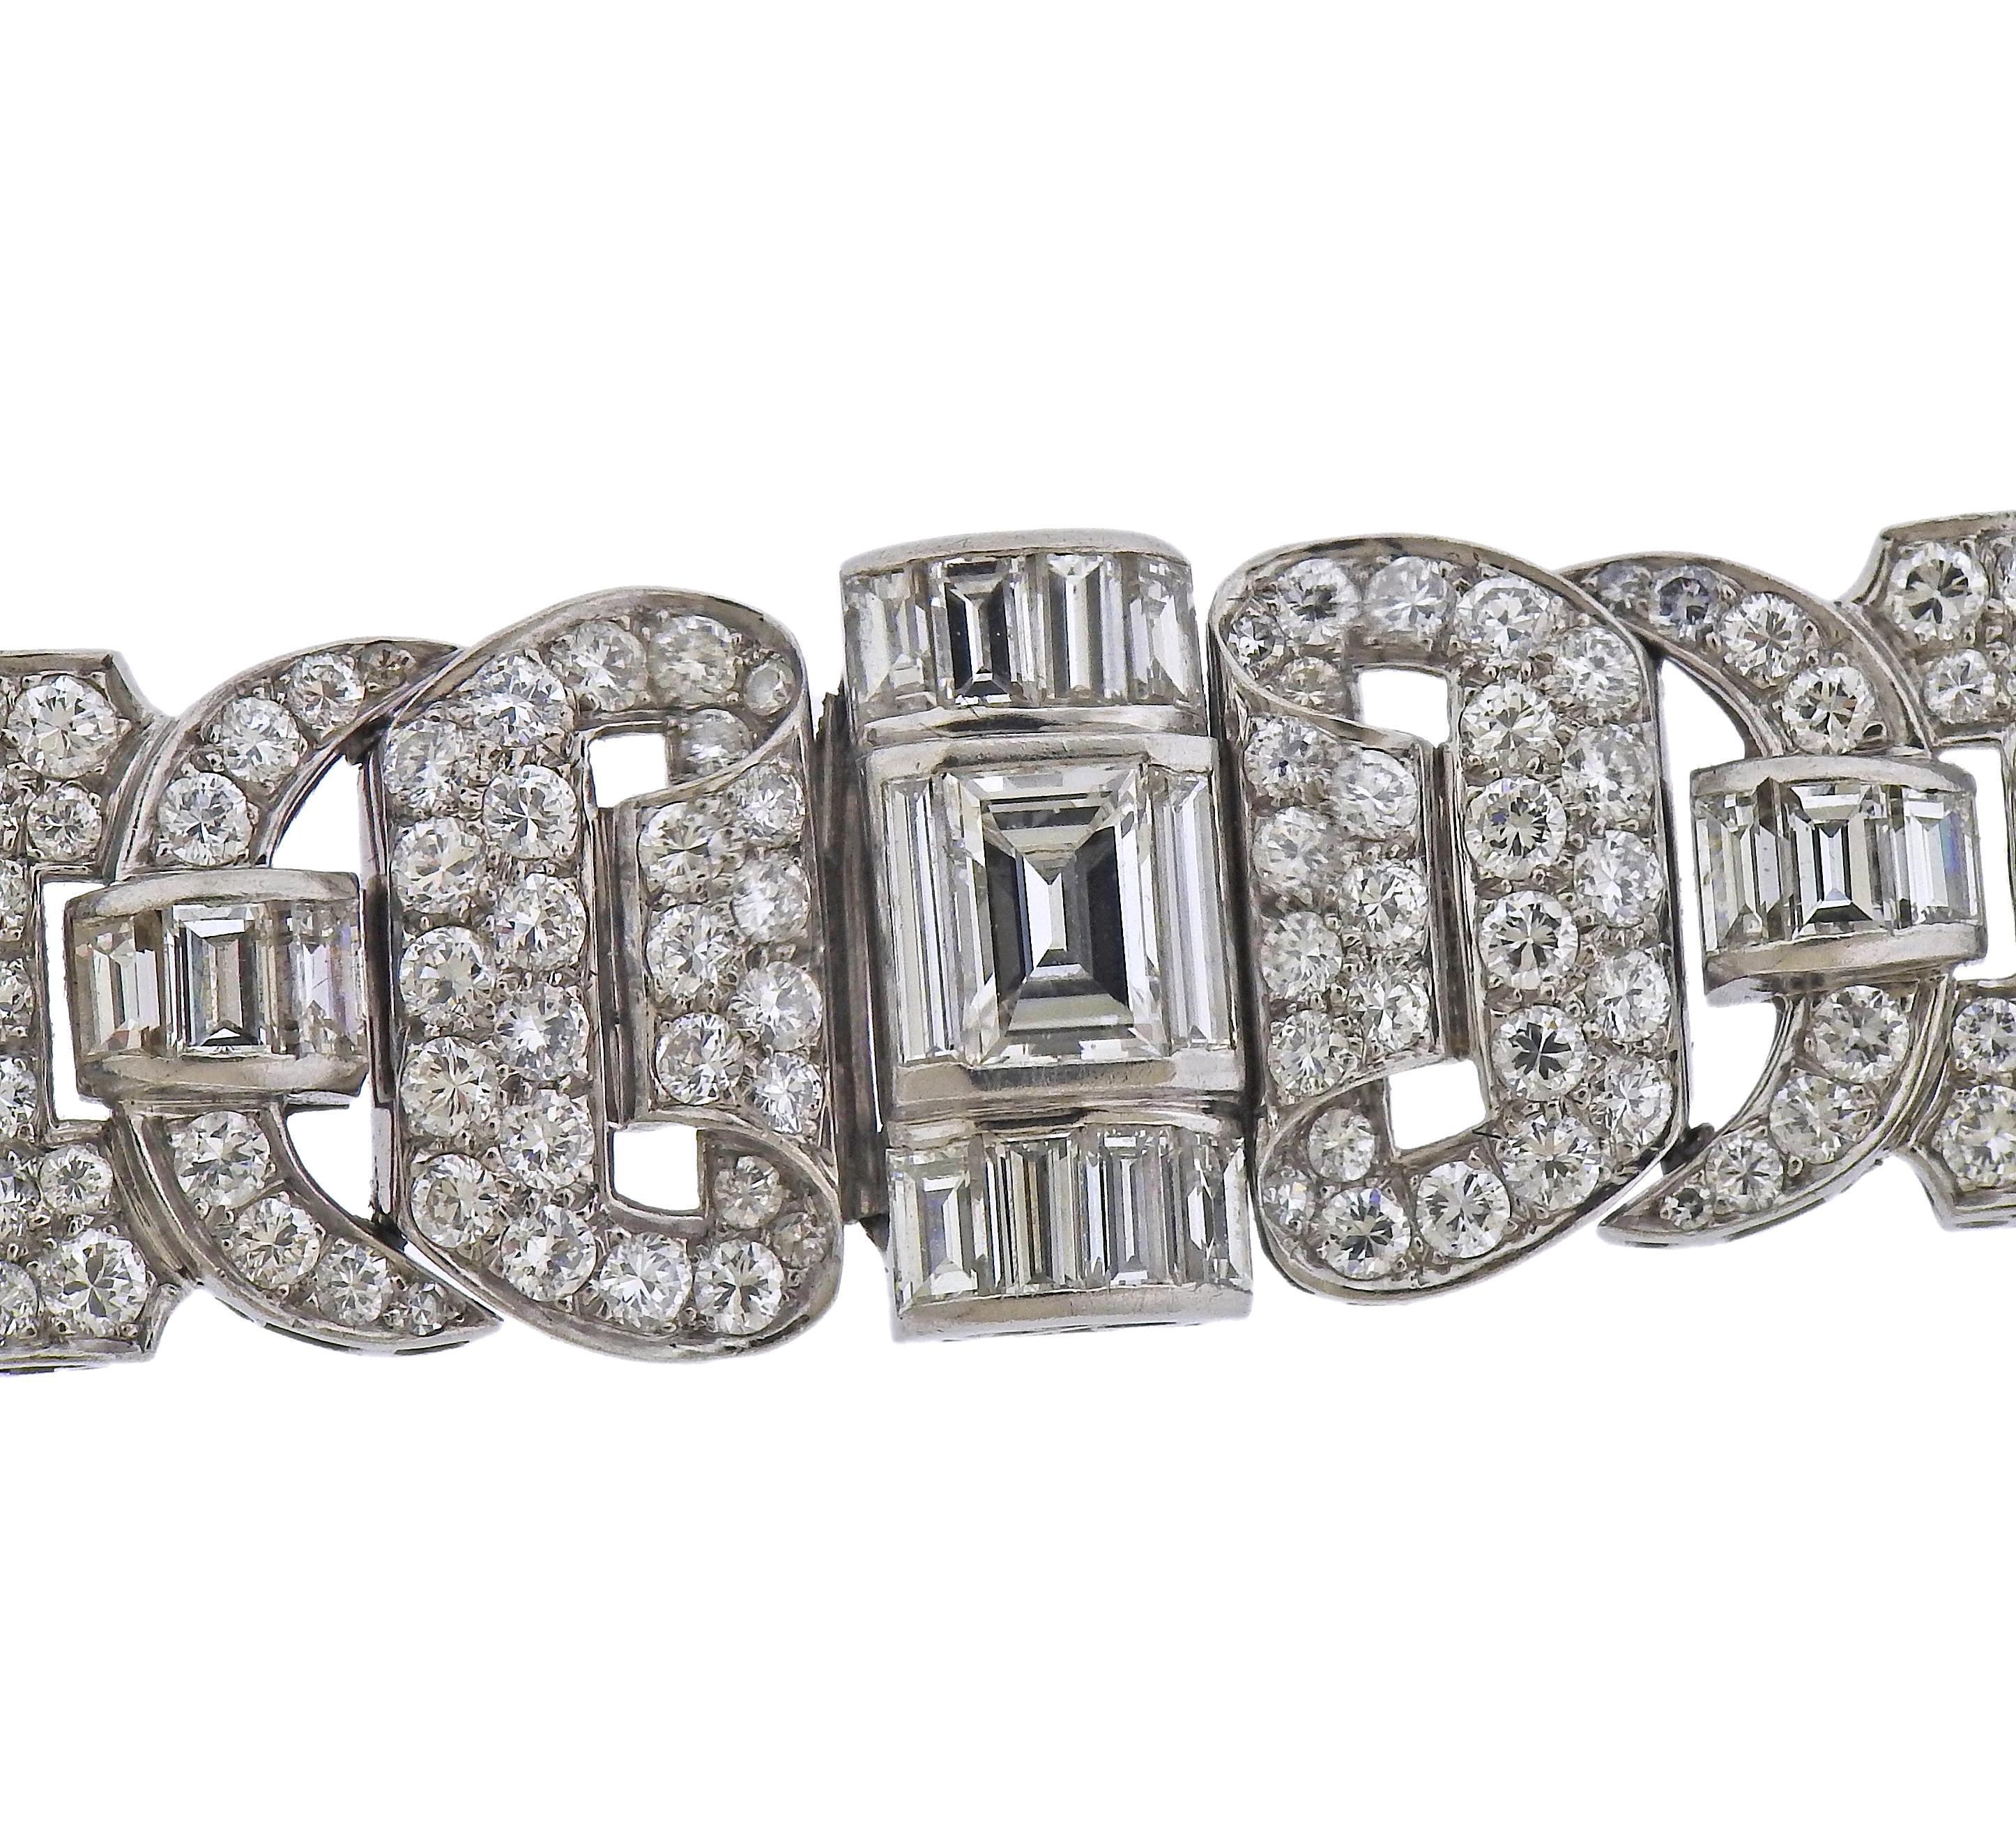 Exquisite platinum bracelet, with oval and round blue sapphires, and a total of approx. 9 carats in round and baguette cut diamonds, with center approx. 0.95ct emerald cut.  Bracelet is 7 2/8